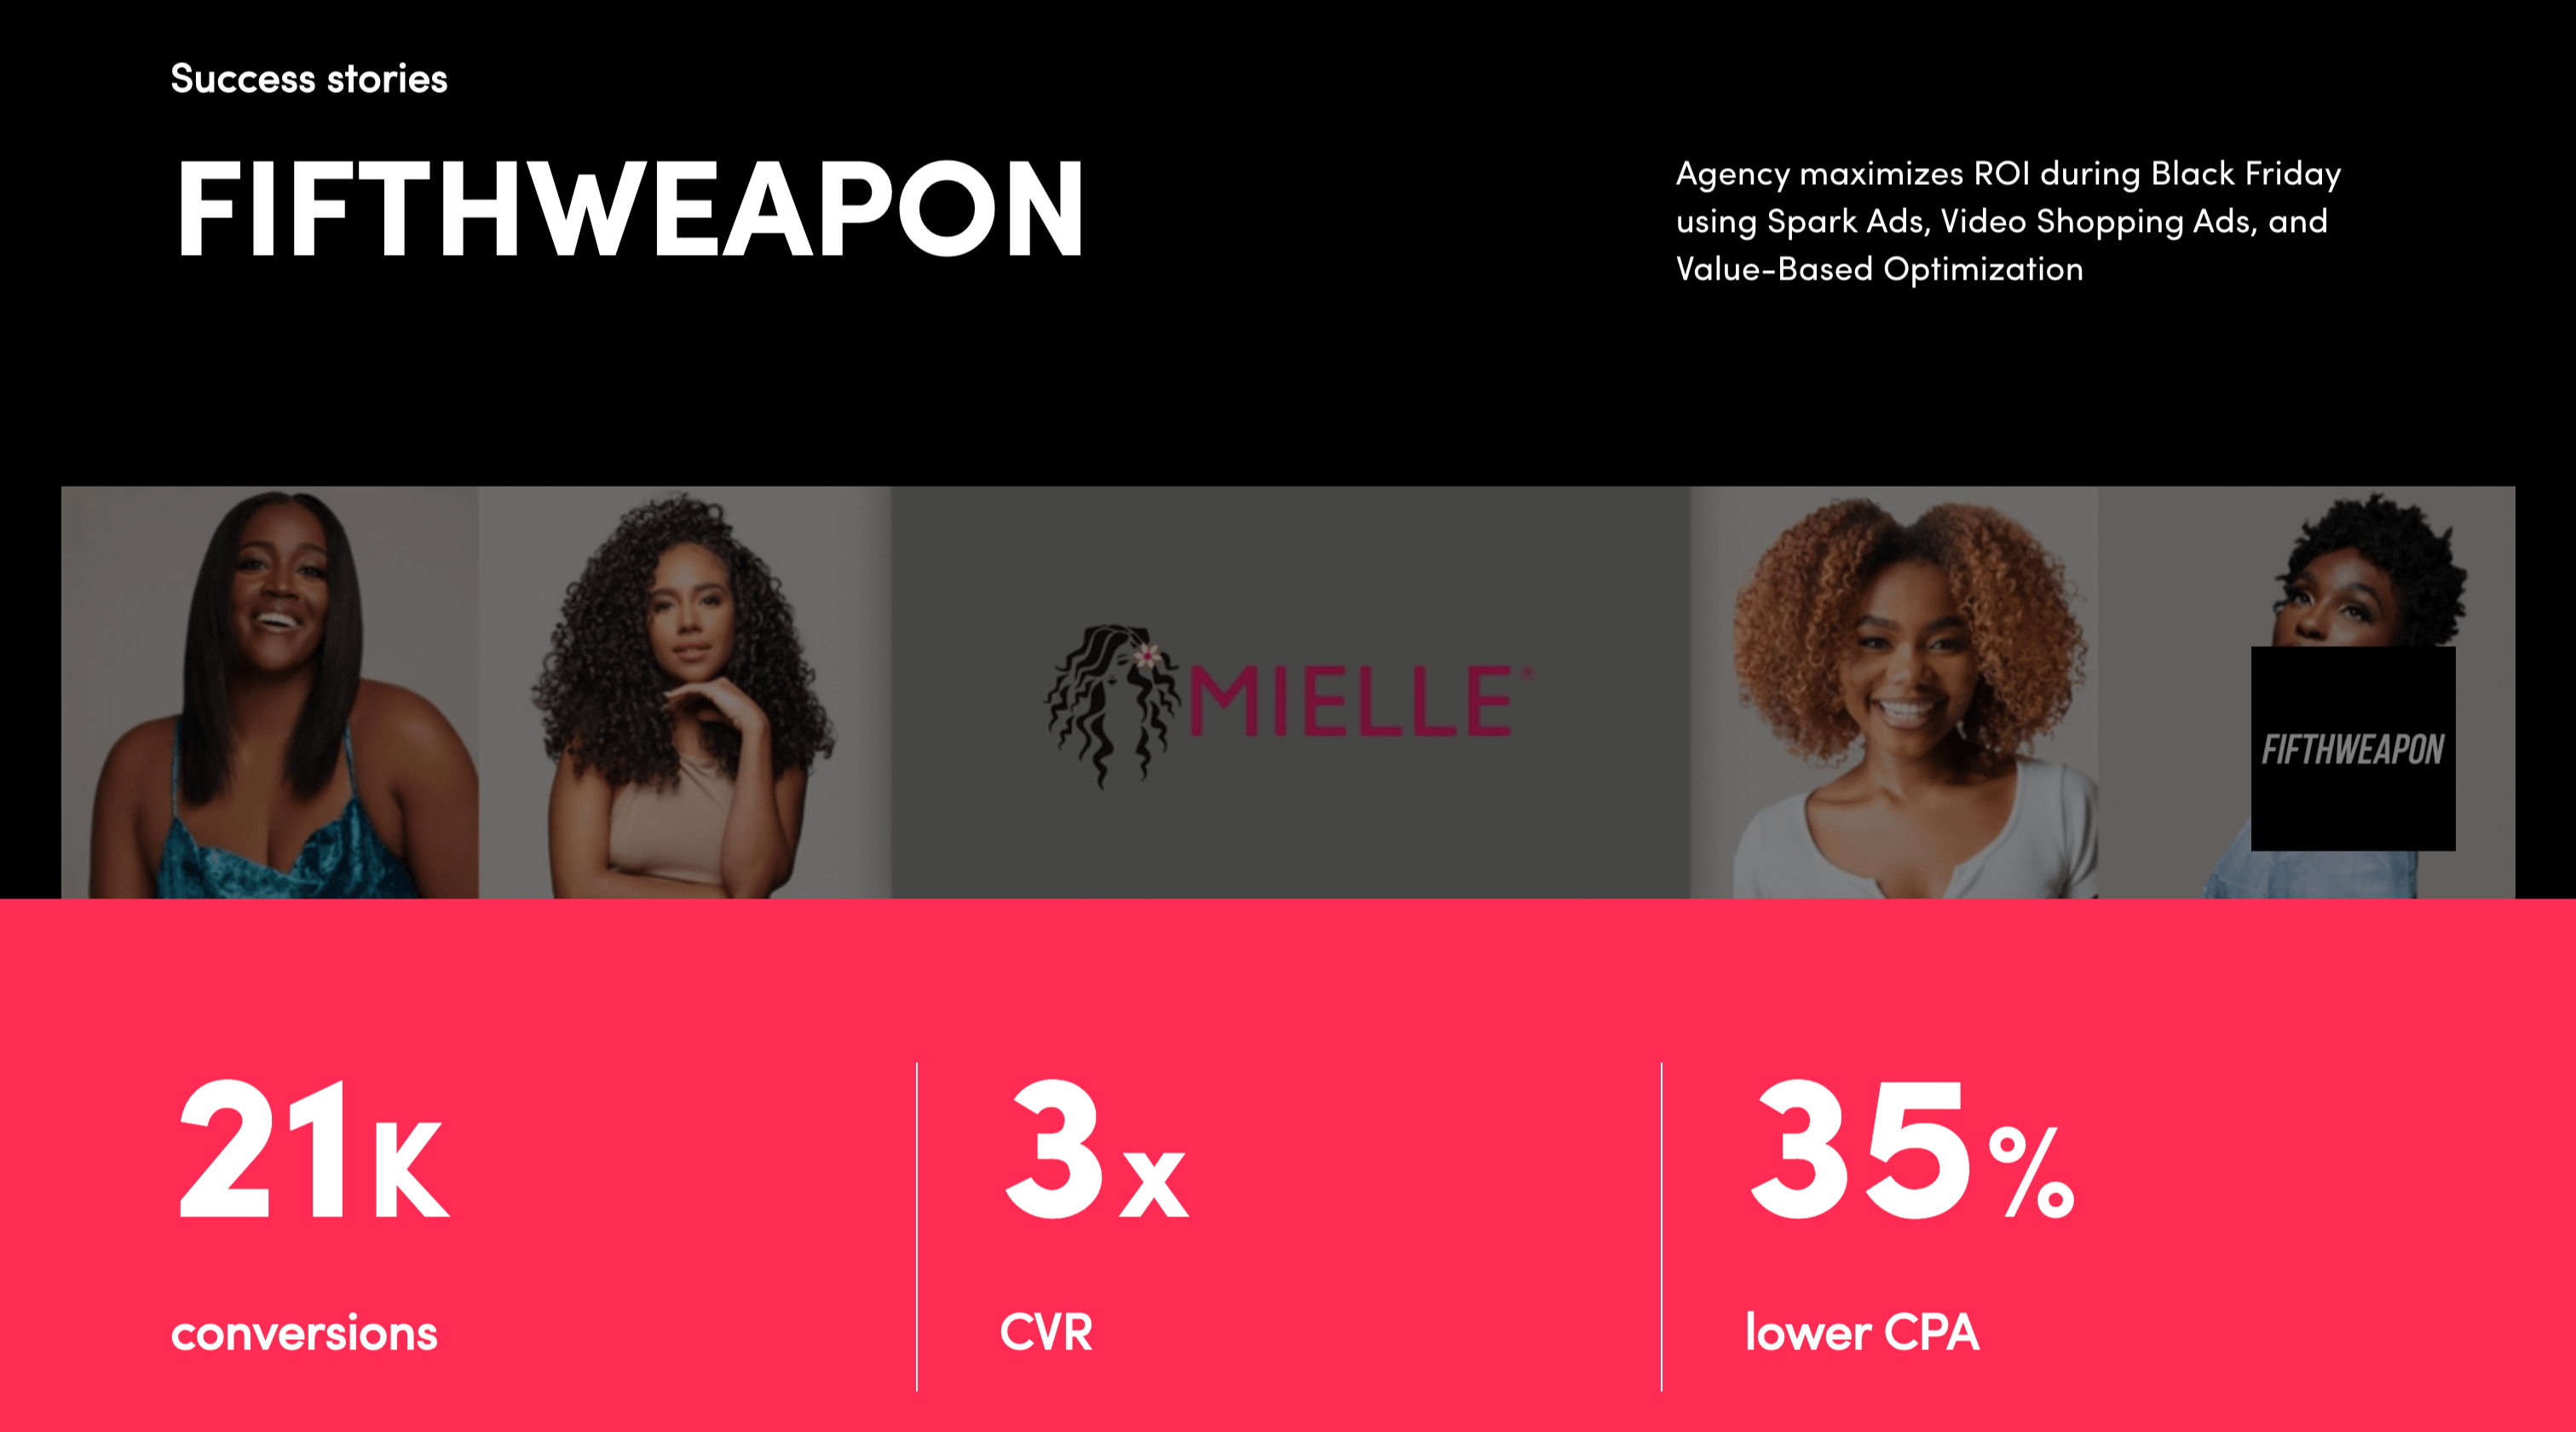 TikTok for business success story of Fifthweapon showing results like 21K conversions, 3x CVR and 35% lower CPA.